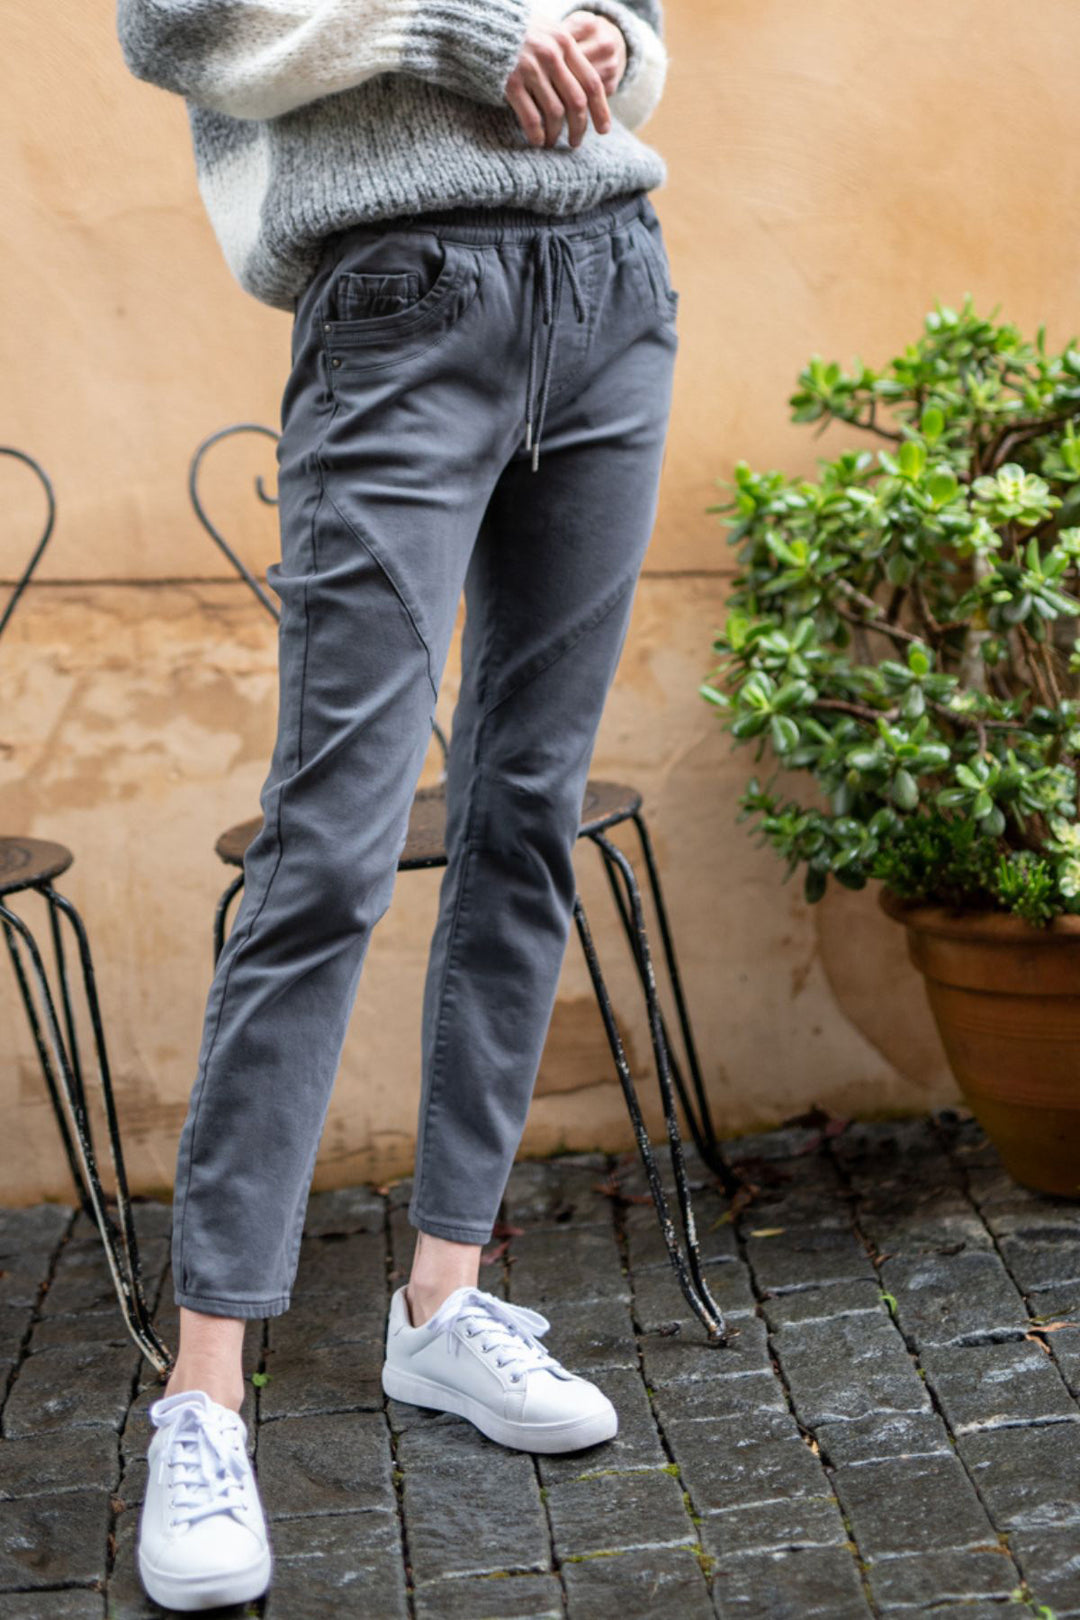 Look your best with these Margo Joggers by Milson. These pants are full length with a tie waist, and five convenient pockets, these jogger pants add style and practicality. The Cotton blend material ensures a comfortable fit and breathability, perfect for everyday use.  Brand : Milson Style Code : ML6152 Colour : Black Sand Fabric : 98% Cotton 2% Spandex Wash separately, cold hand wash only 